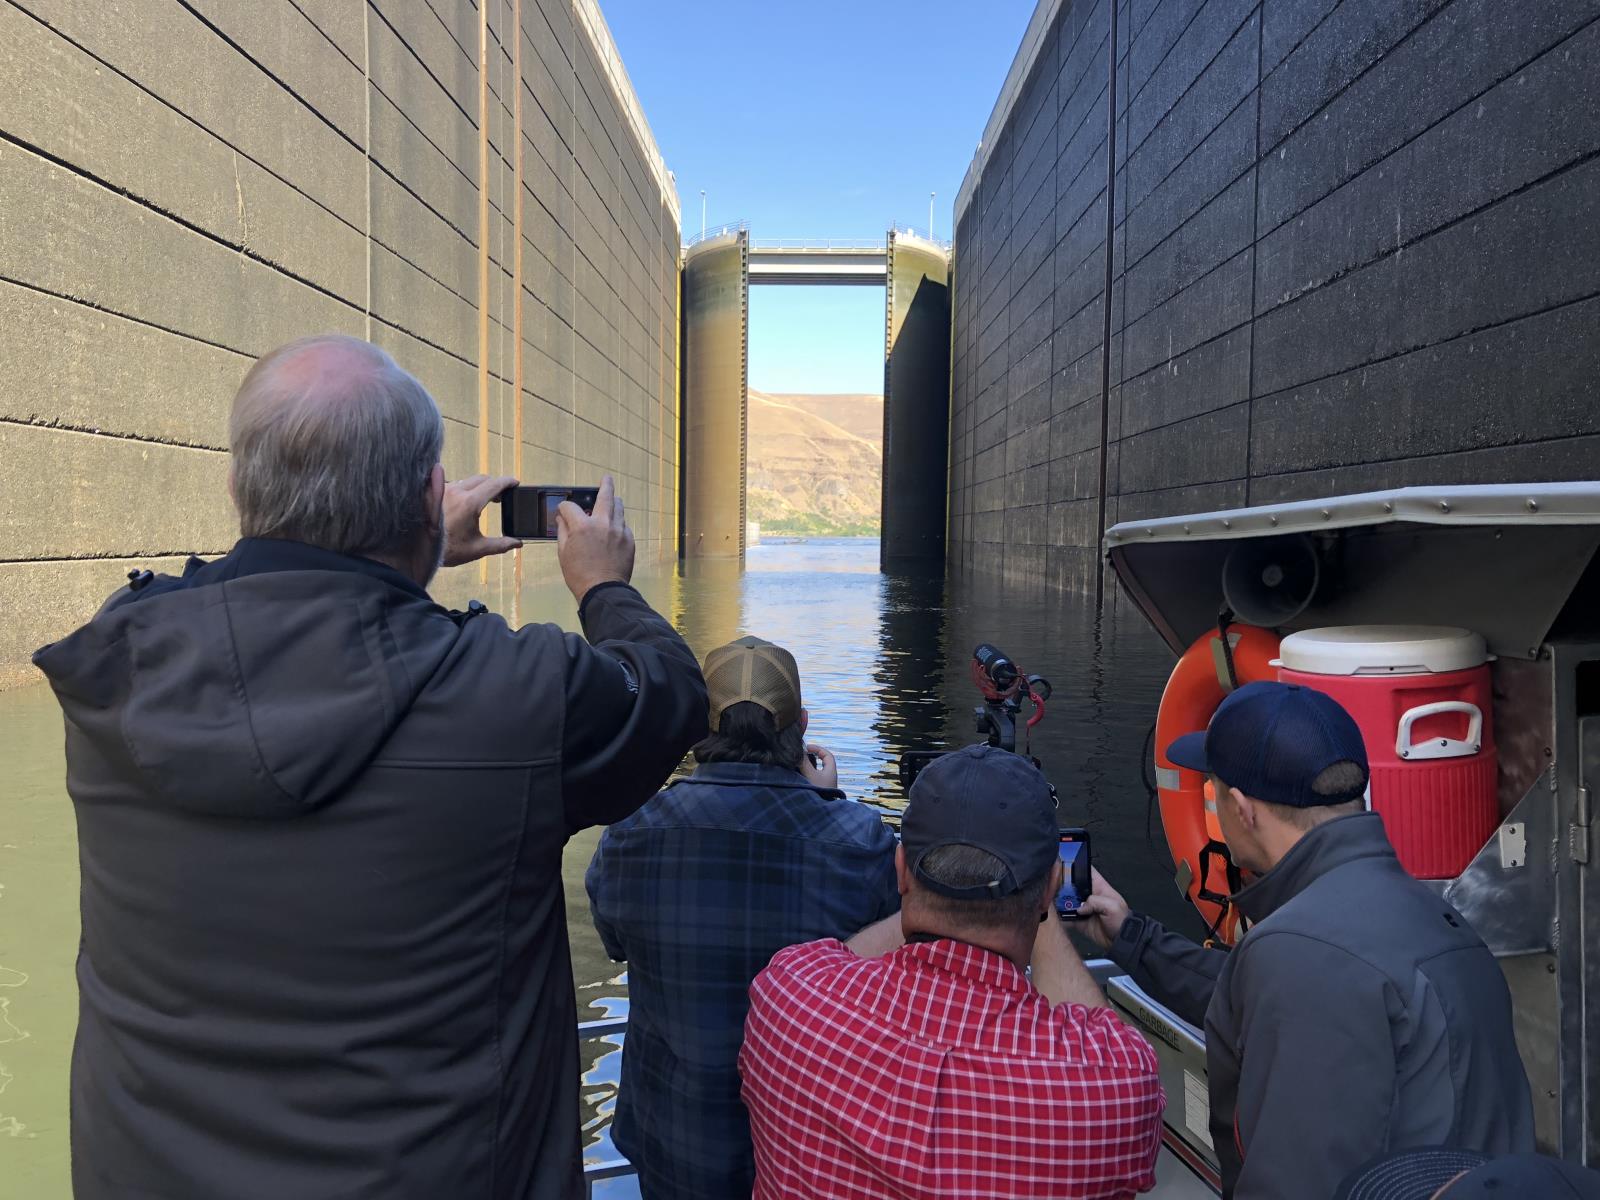 Participants of a June 15-16 dam tour event take pictures of a lock opening at the Lower Granite Dam, one of four lower Snake River dams that have been targeted for removal by some groups over the years. American Farm Bureau Federation President Zippy Duvall and other state, local and national ag industry leaders attended the event. 